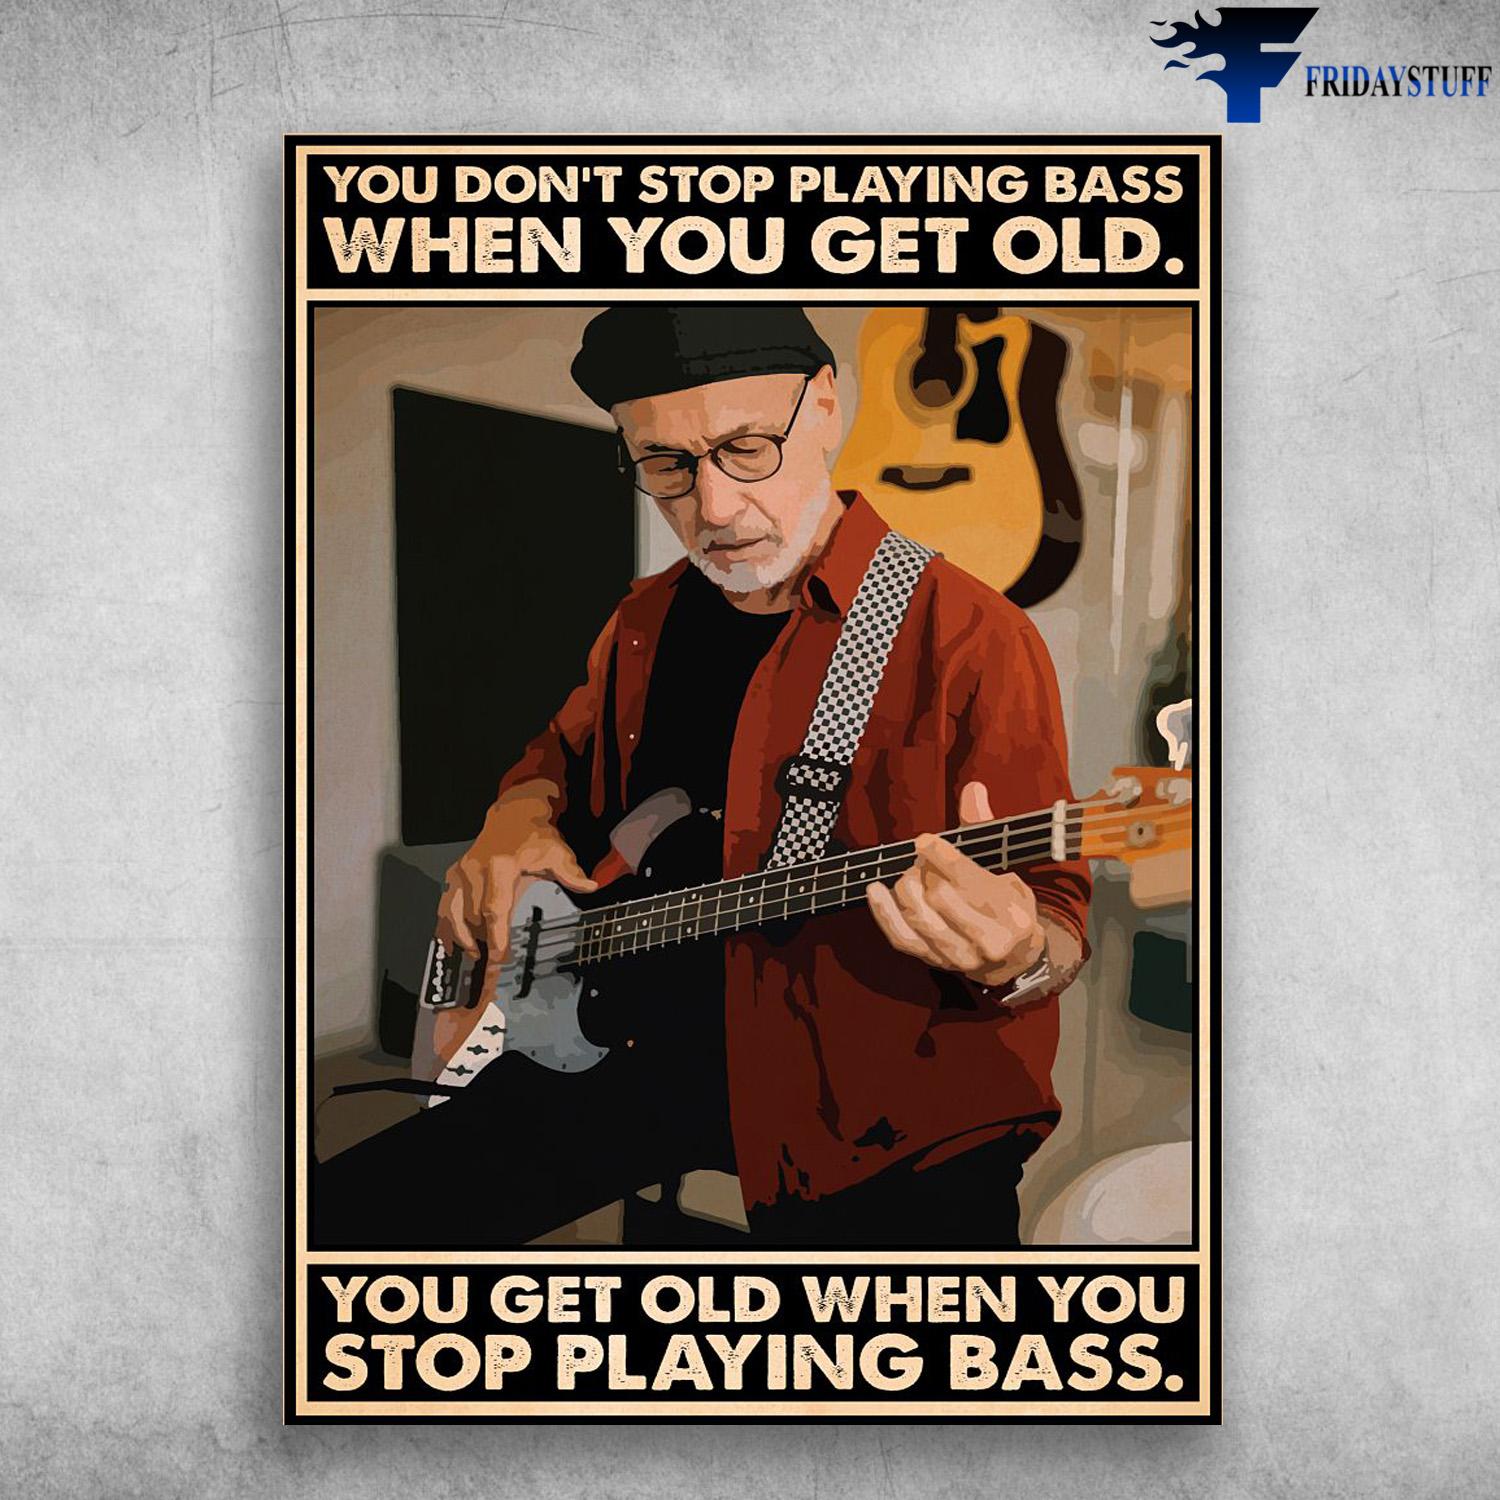 Bass Player, Old Man Loves Bass - You Don't Playing Bass When You Get Old, You Get Old When You Stop Playing Bass